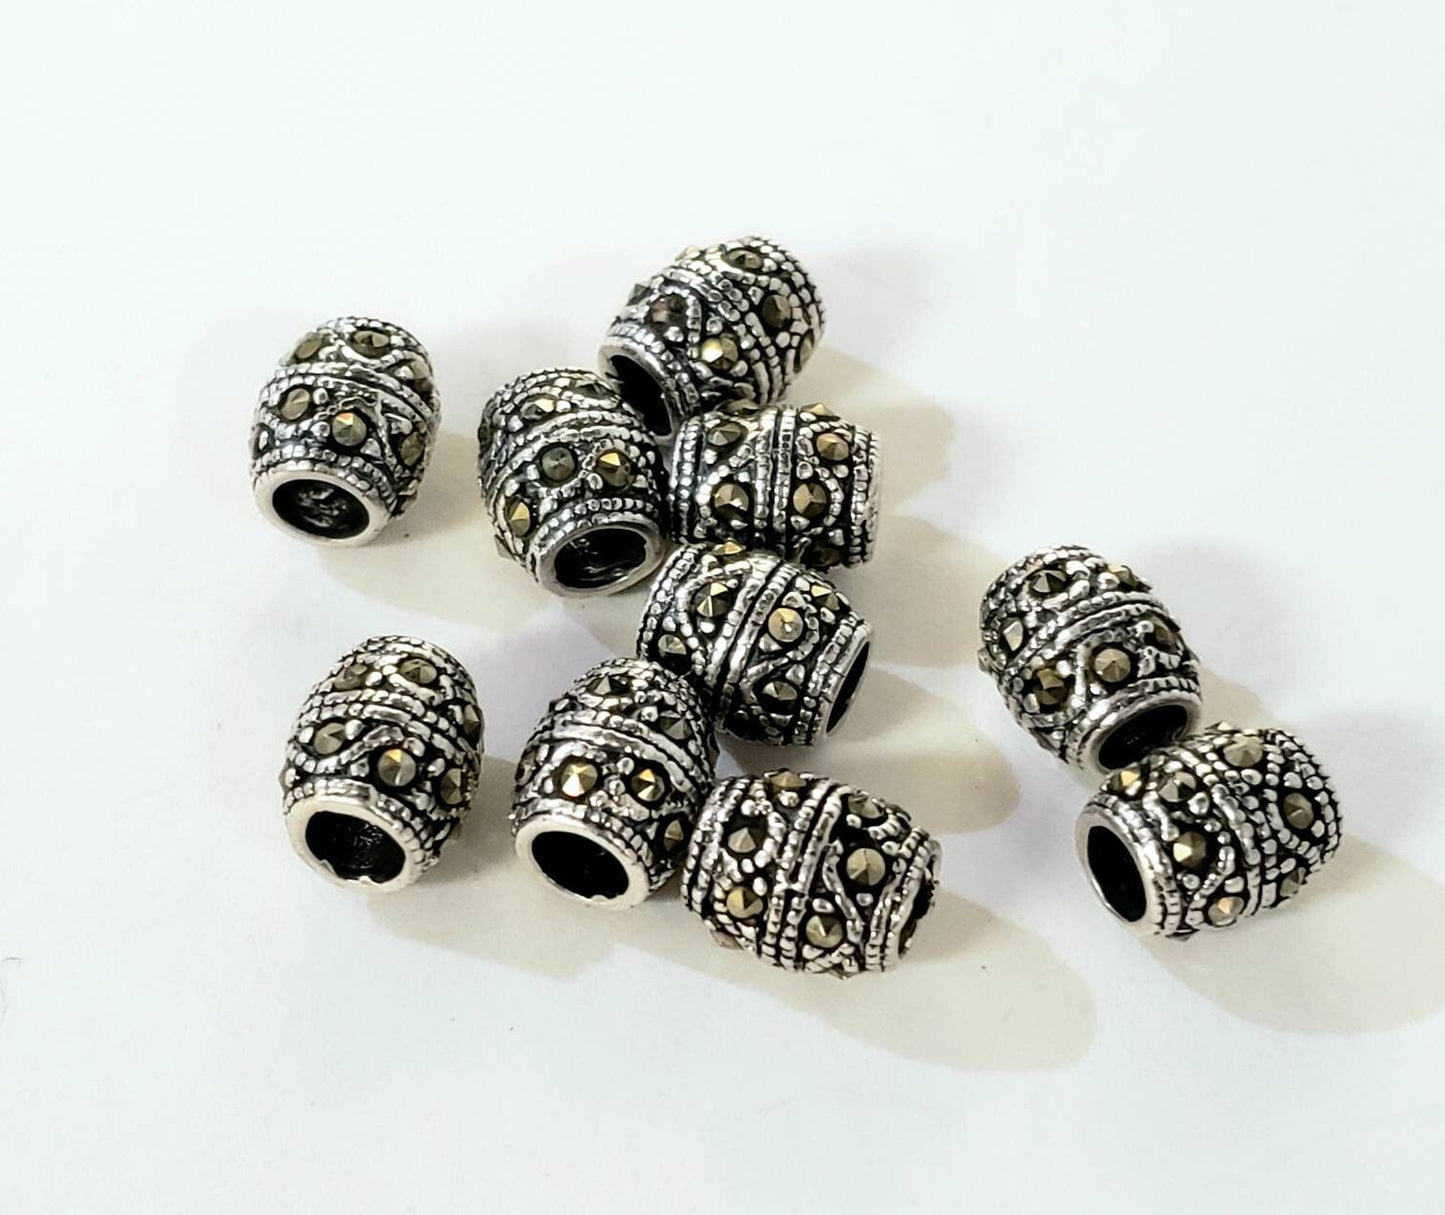 2 pieces Marcasite 925 sterling silver 7×8mm, 3mm Hole, oval drum vintage spacer bead , jewelry making necklace bracelet earrings spacers